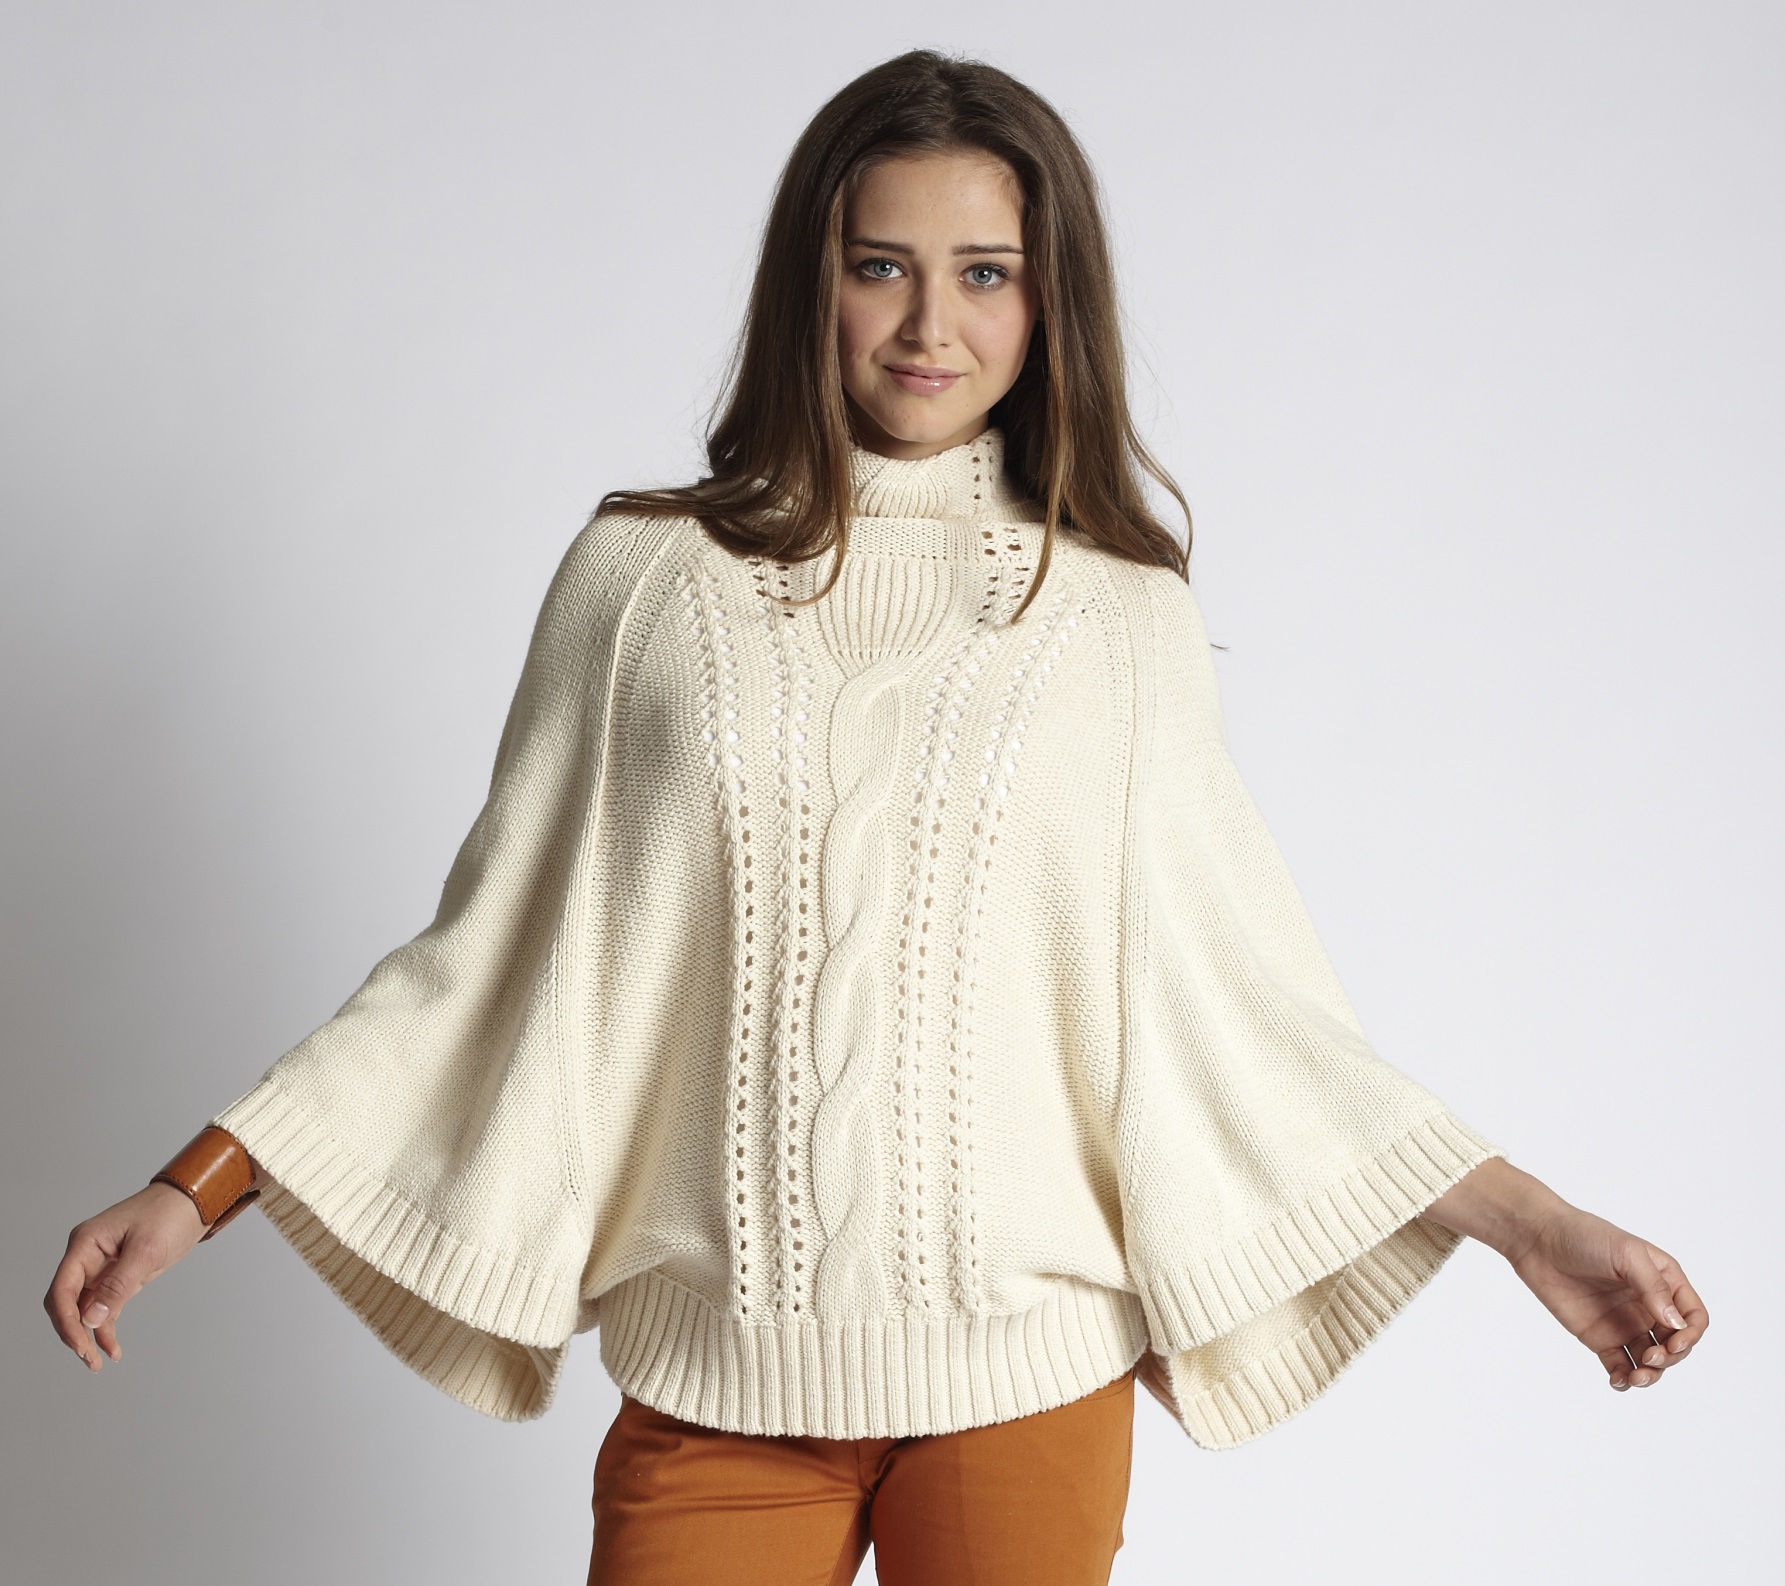 poncho sweater ... mothers-en-vogue-cable-knit-nursing-poncho-sweater- ... QHSKABE